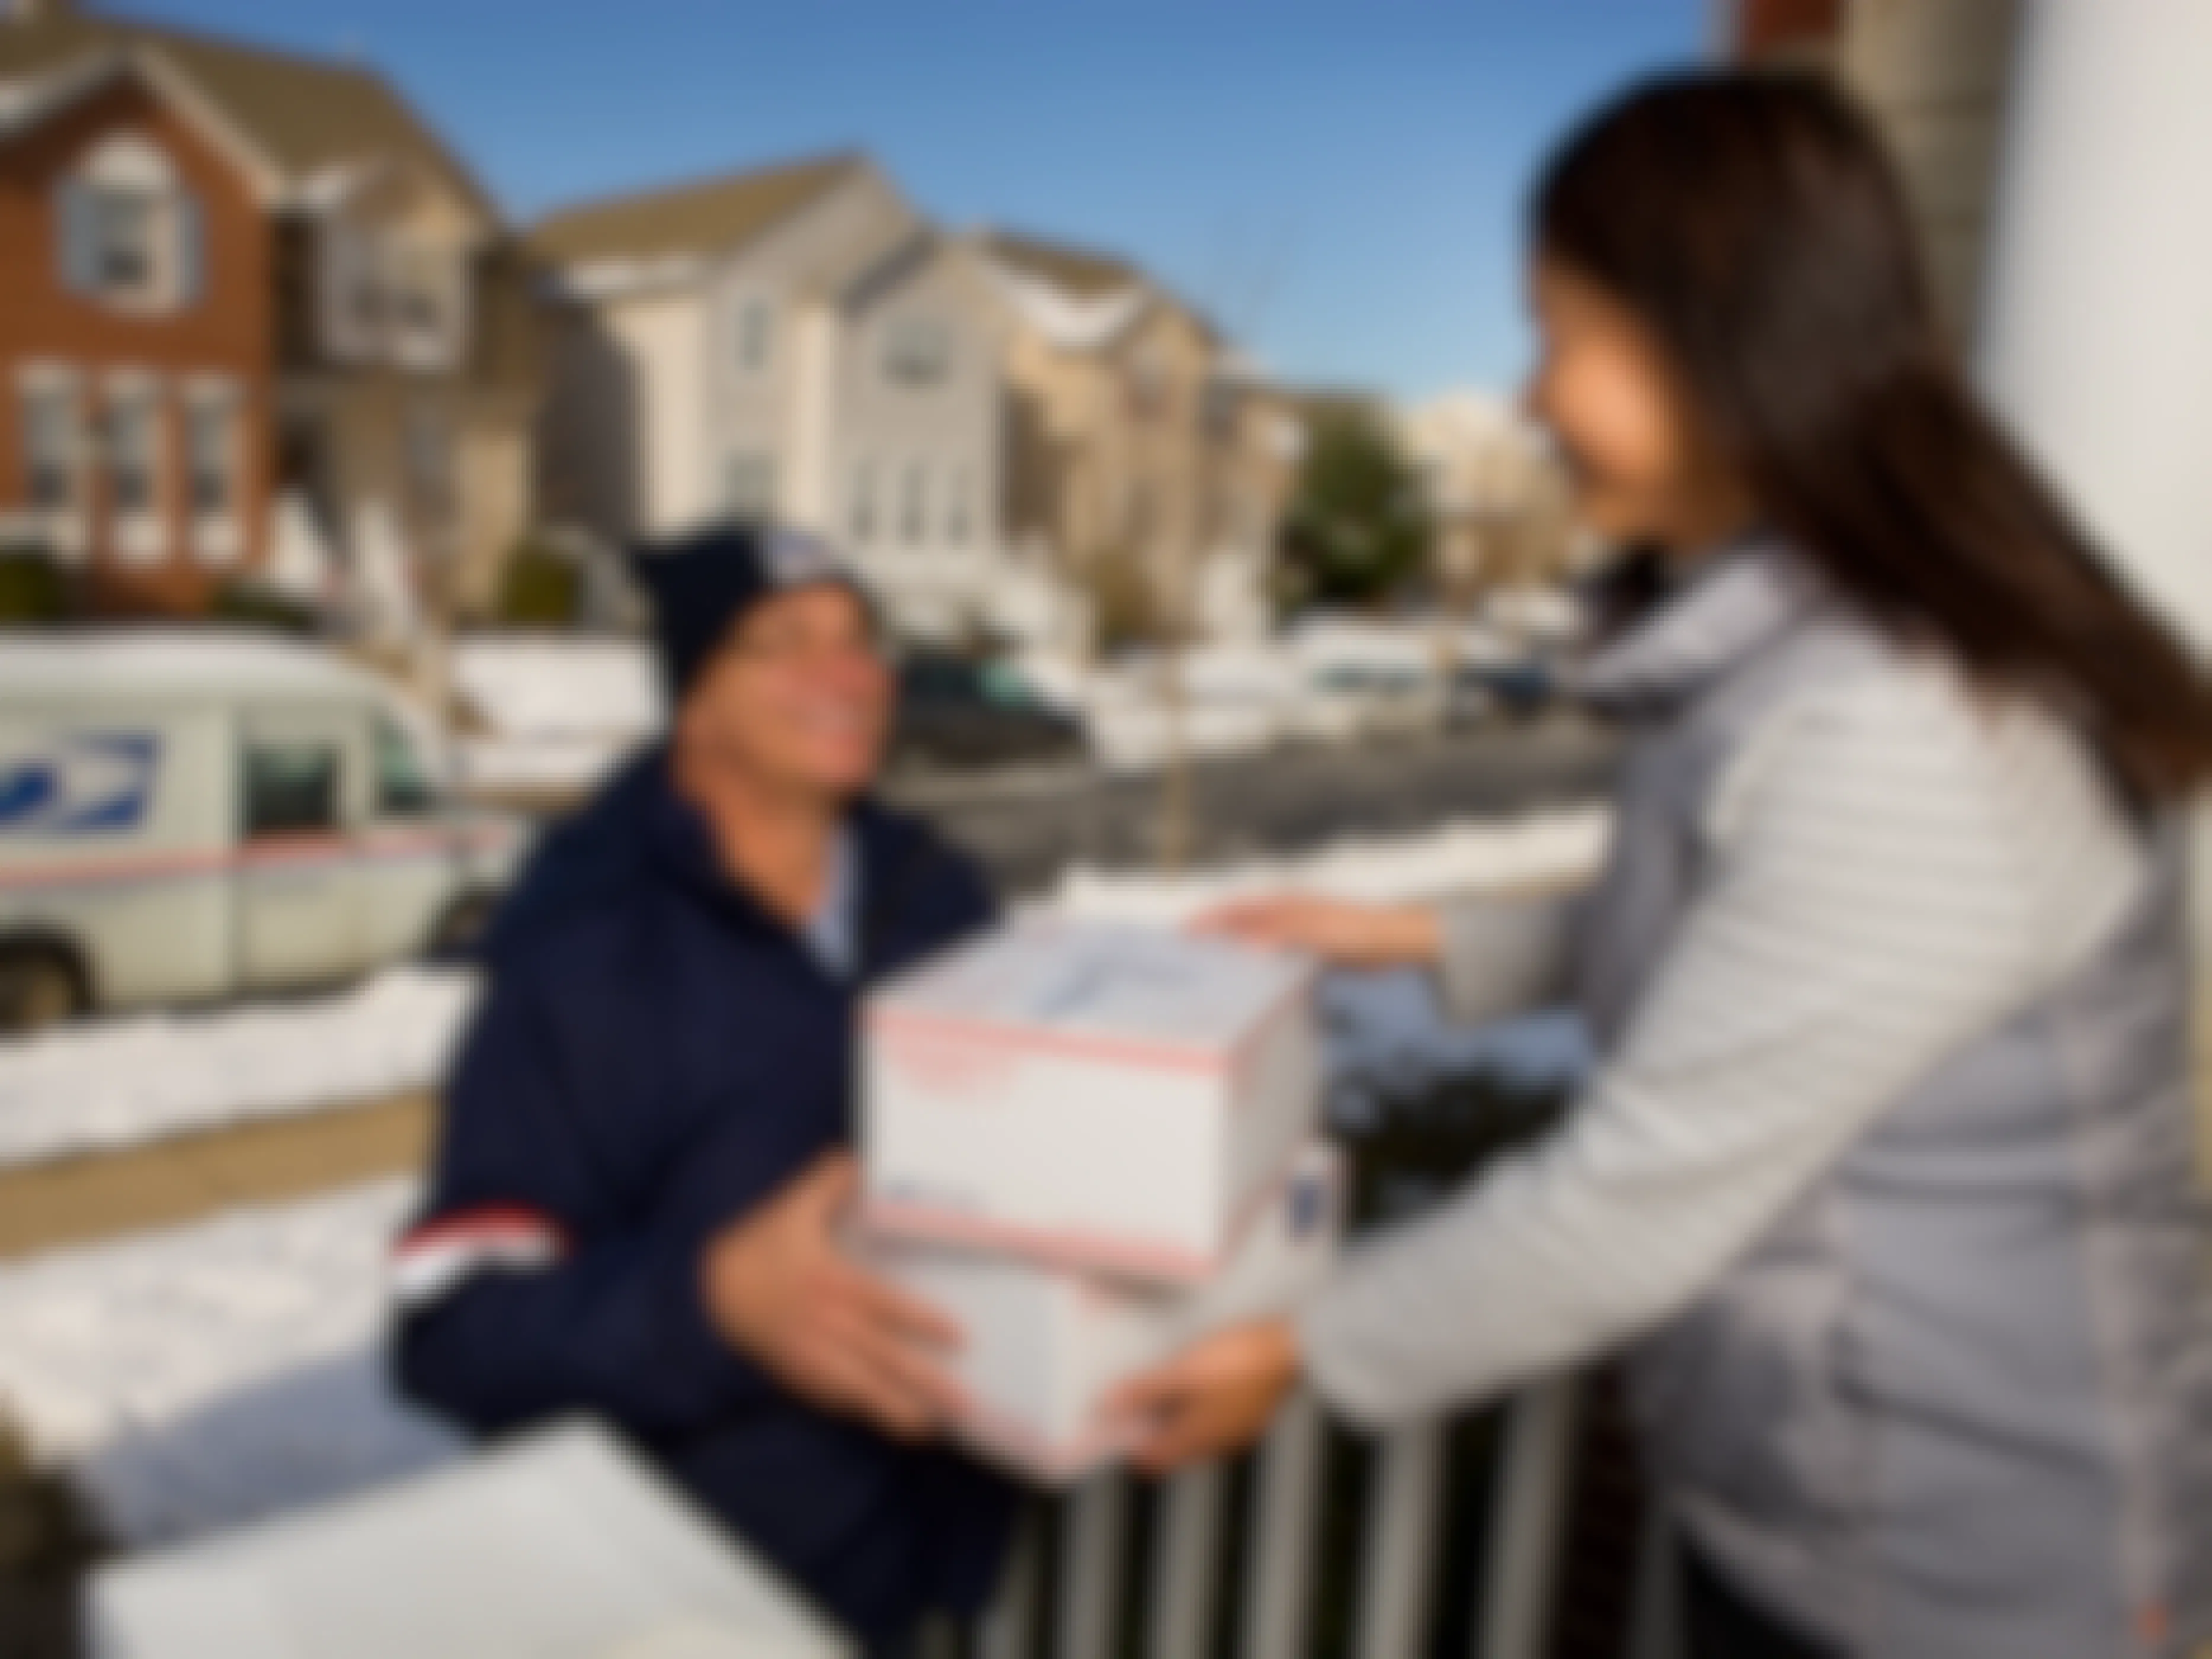 A USPS Driver delivering packages to a person at their house